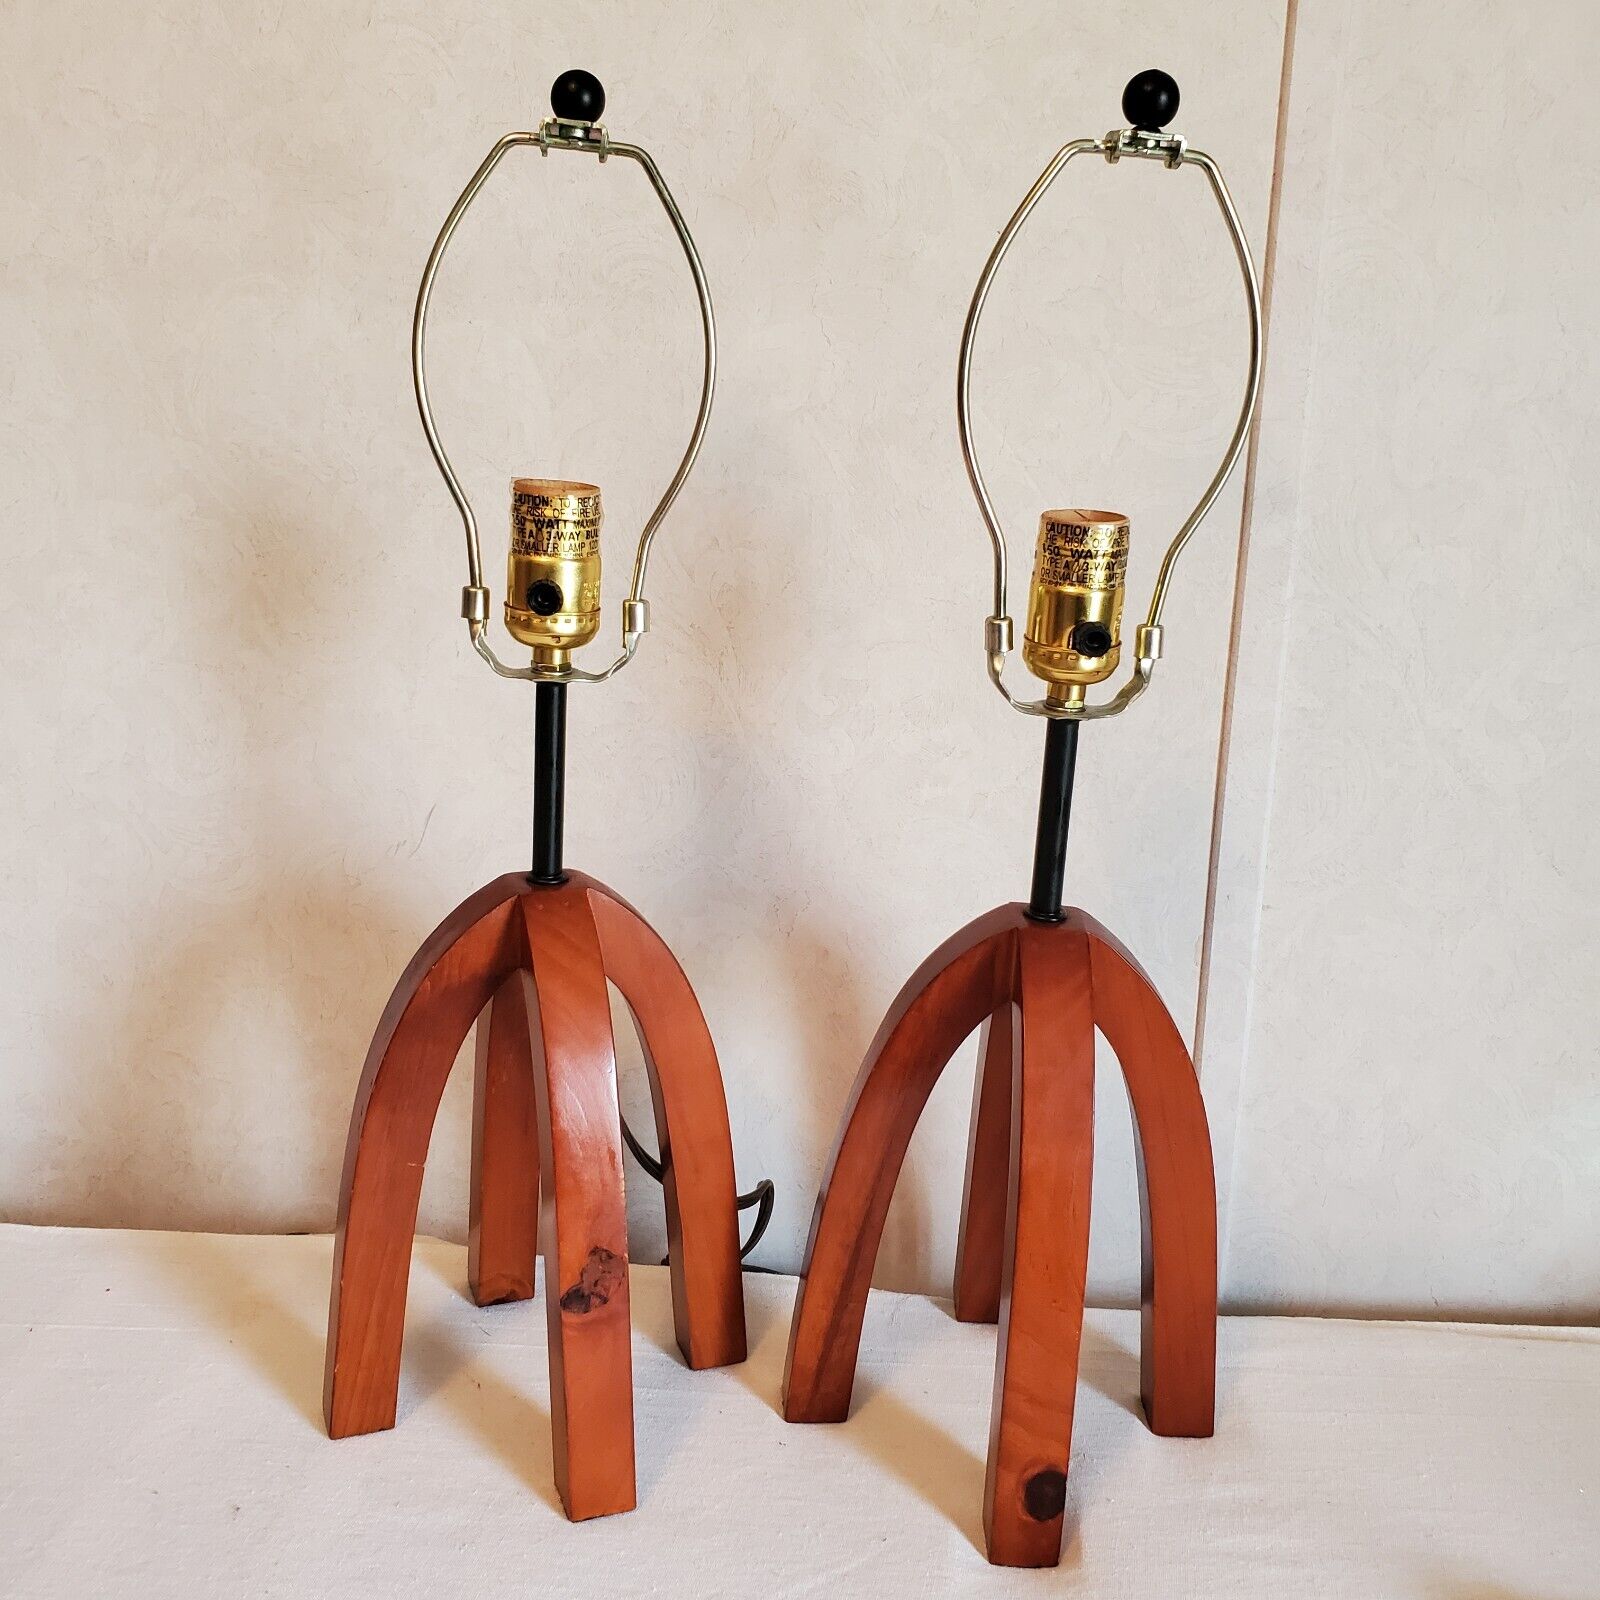 Pair Of Mid Century Table Lamps Cherry Wood 4 Leg Vintage NO SHADES